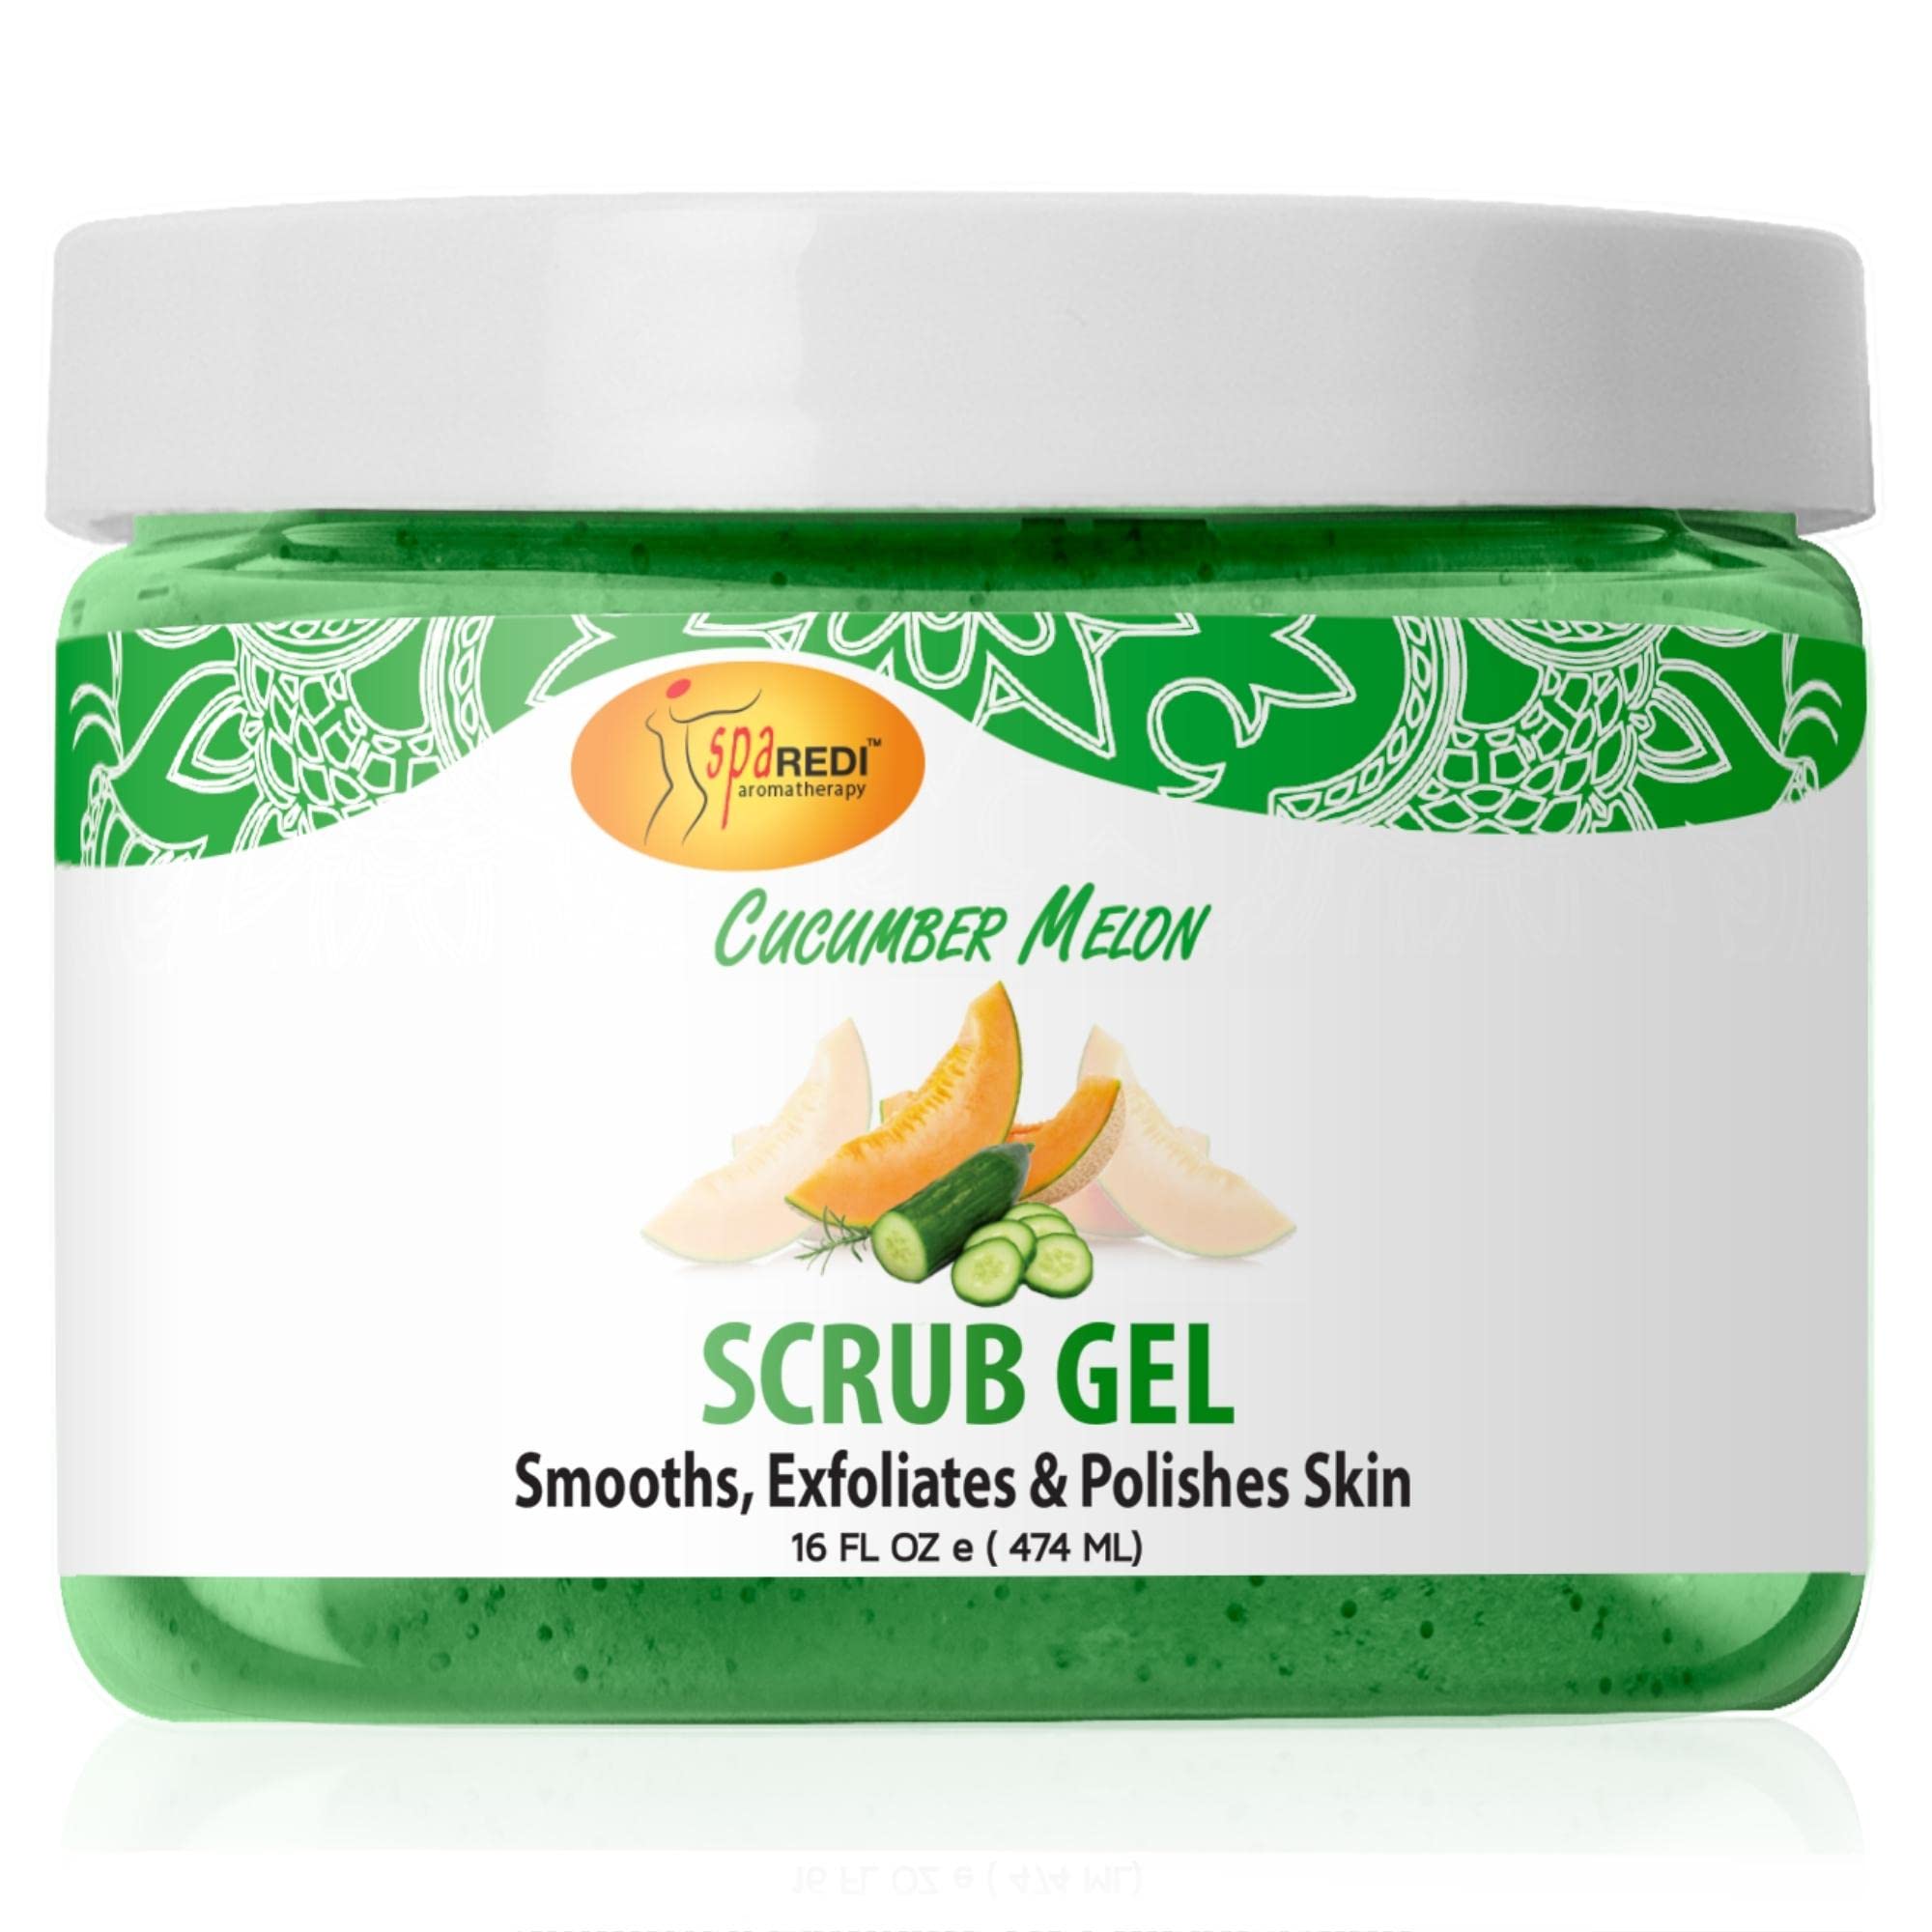 SPA REDI – Exfoliating Scrub Pumice Gel, Cucumber Melon, 16 oz - Manicure, Pedicure and Body Exfoliator Infused with Hyaluronic Acid, Amino Acids, Panthenol and Comfrey Extract